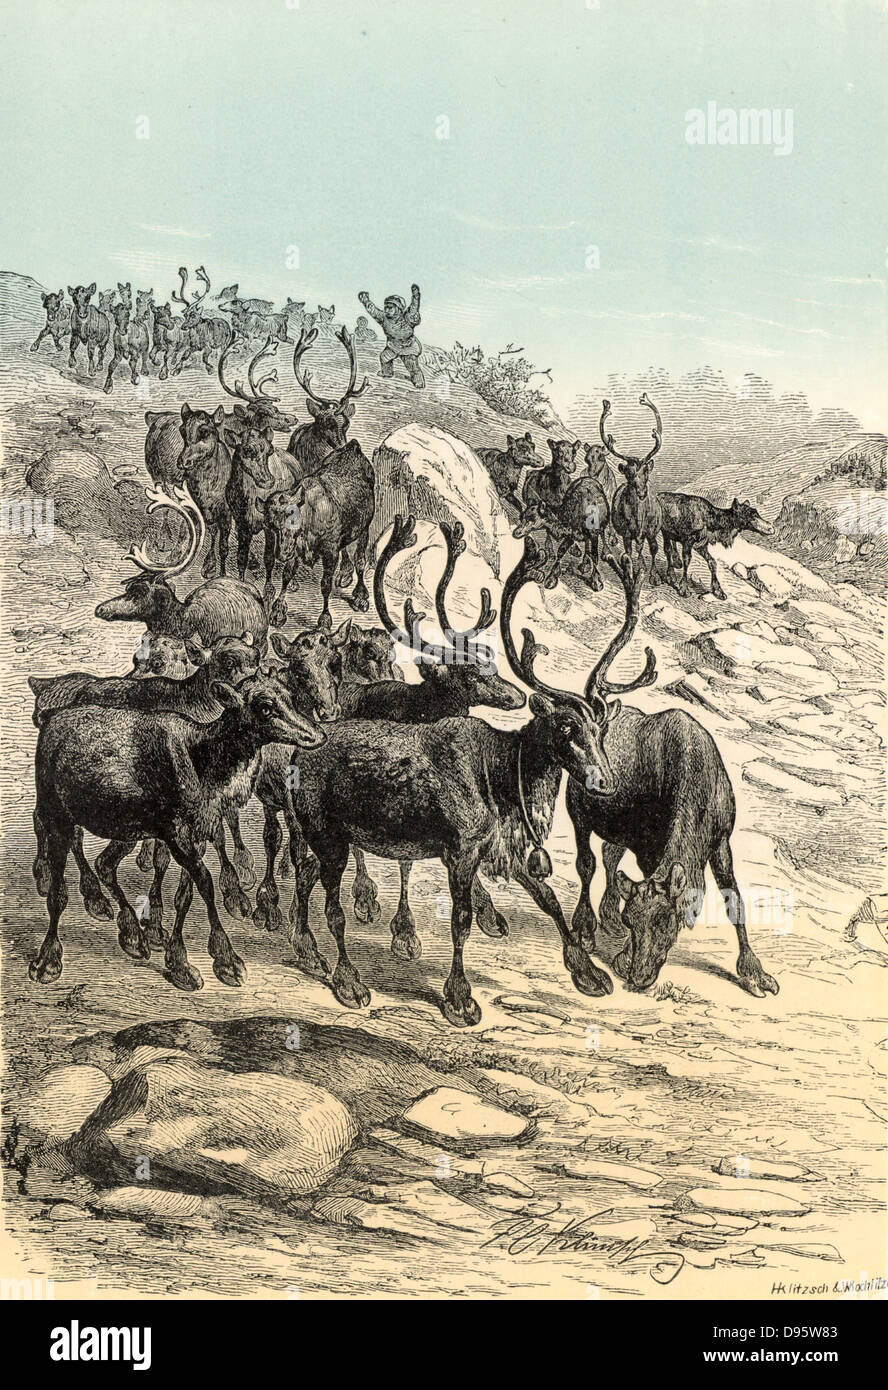 Reindeer (Rangifer trandus) Arctic and Subarctic deer herded for its meat, milk and use as a draught animal.  Chromoxylograph from 'The Polar World' by G Hartwig (London, 1874). Stock Photo